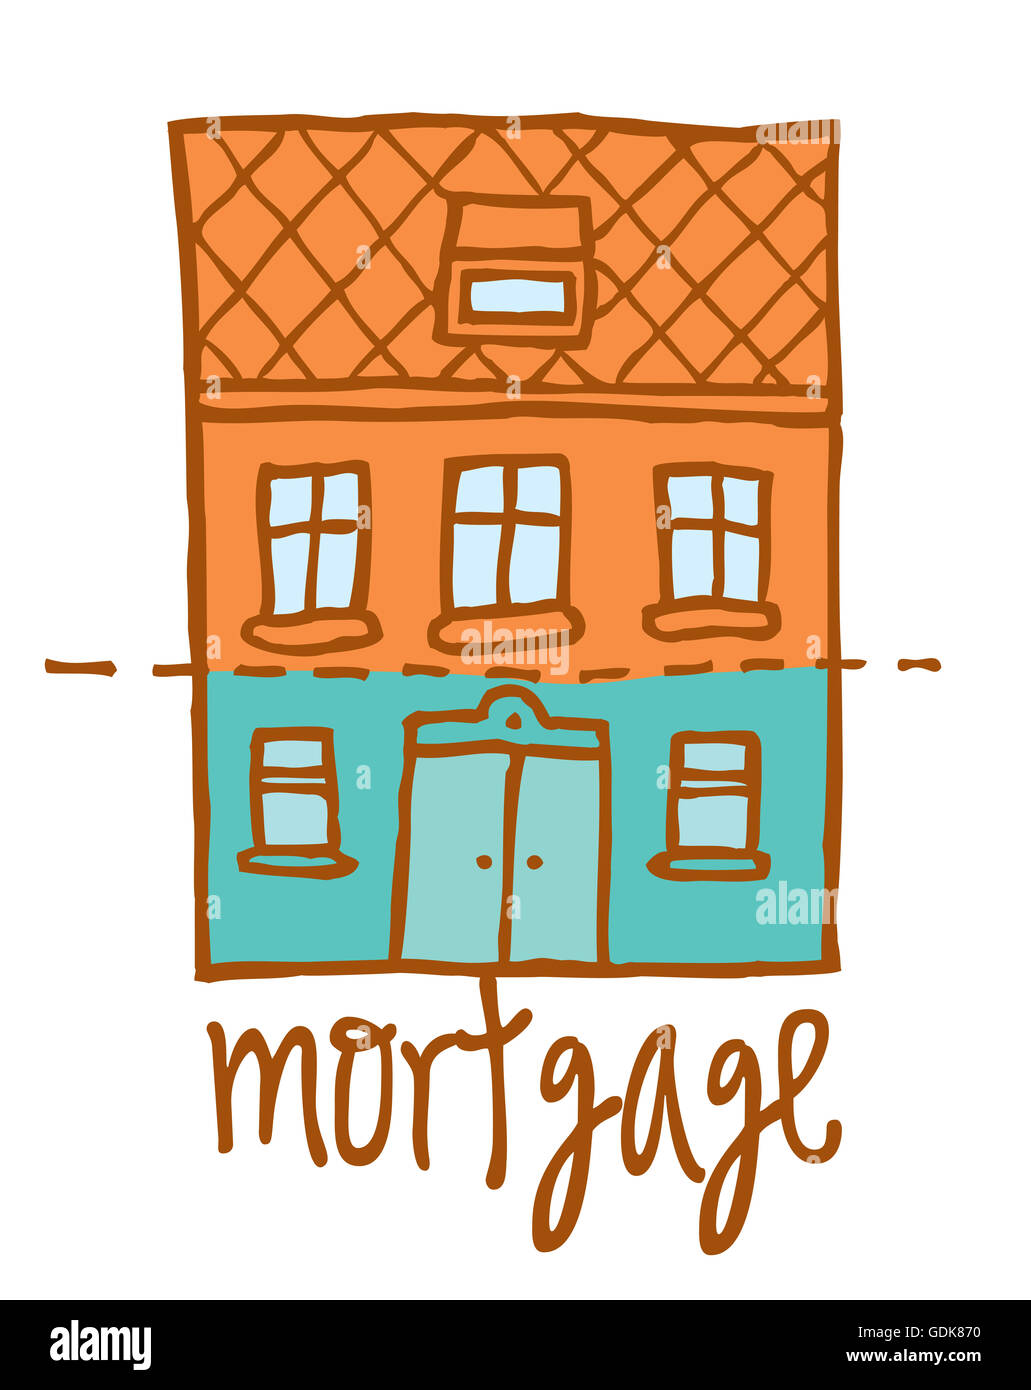 Cartoon illustration of a house or property with mortgage word Stock Photo